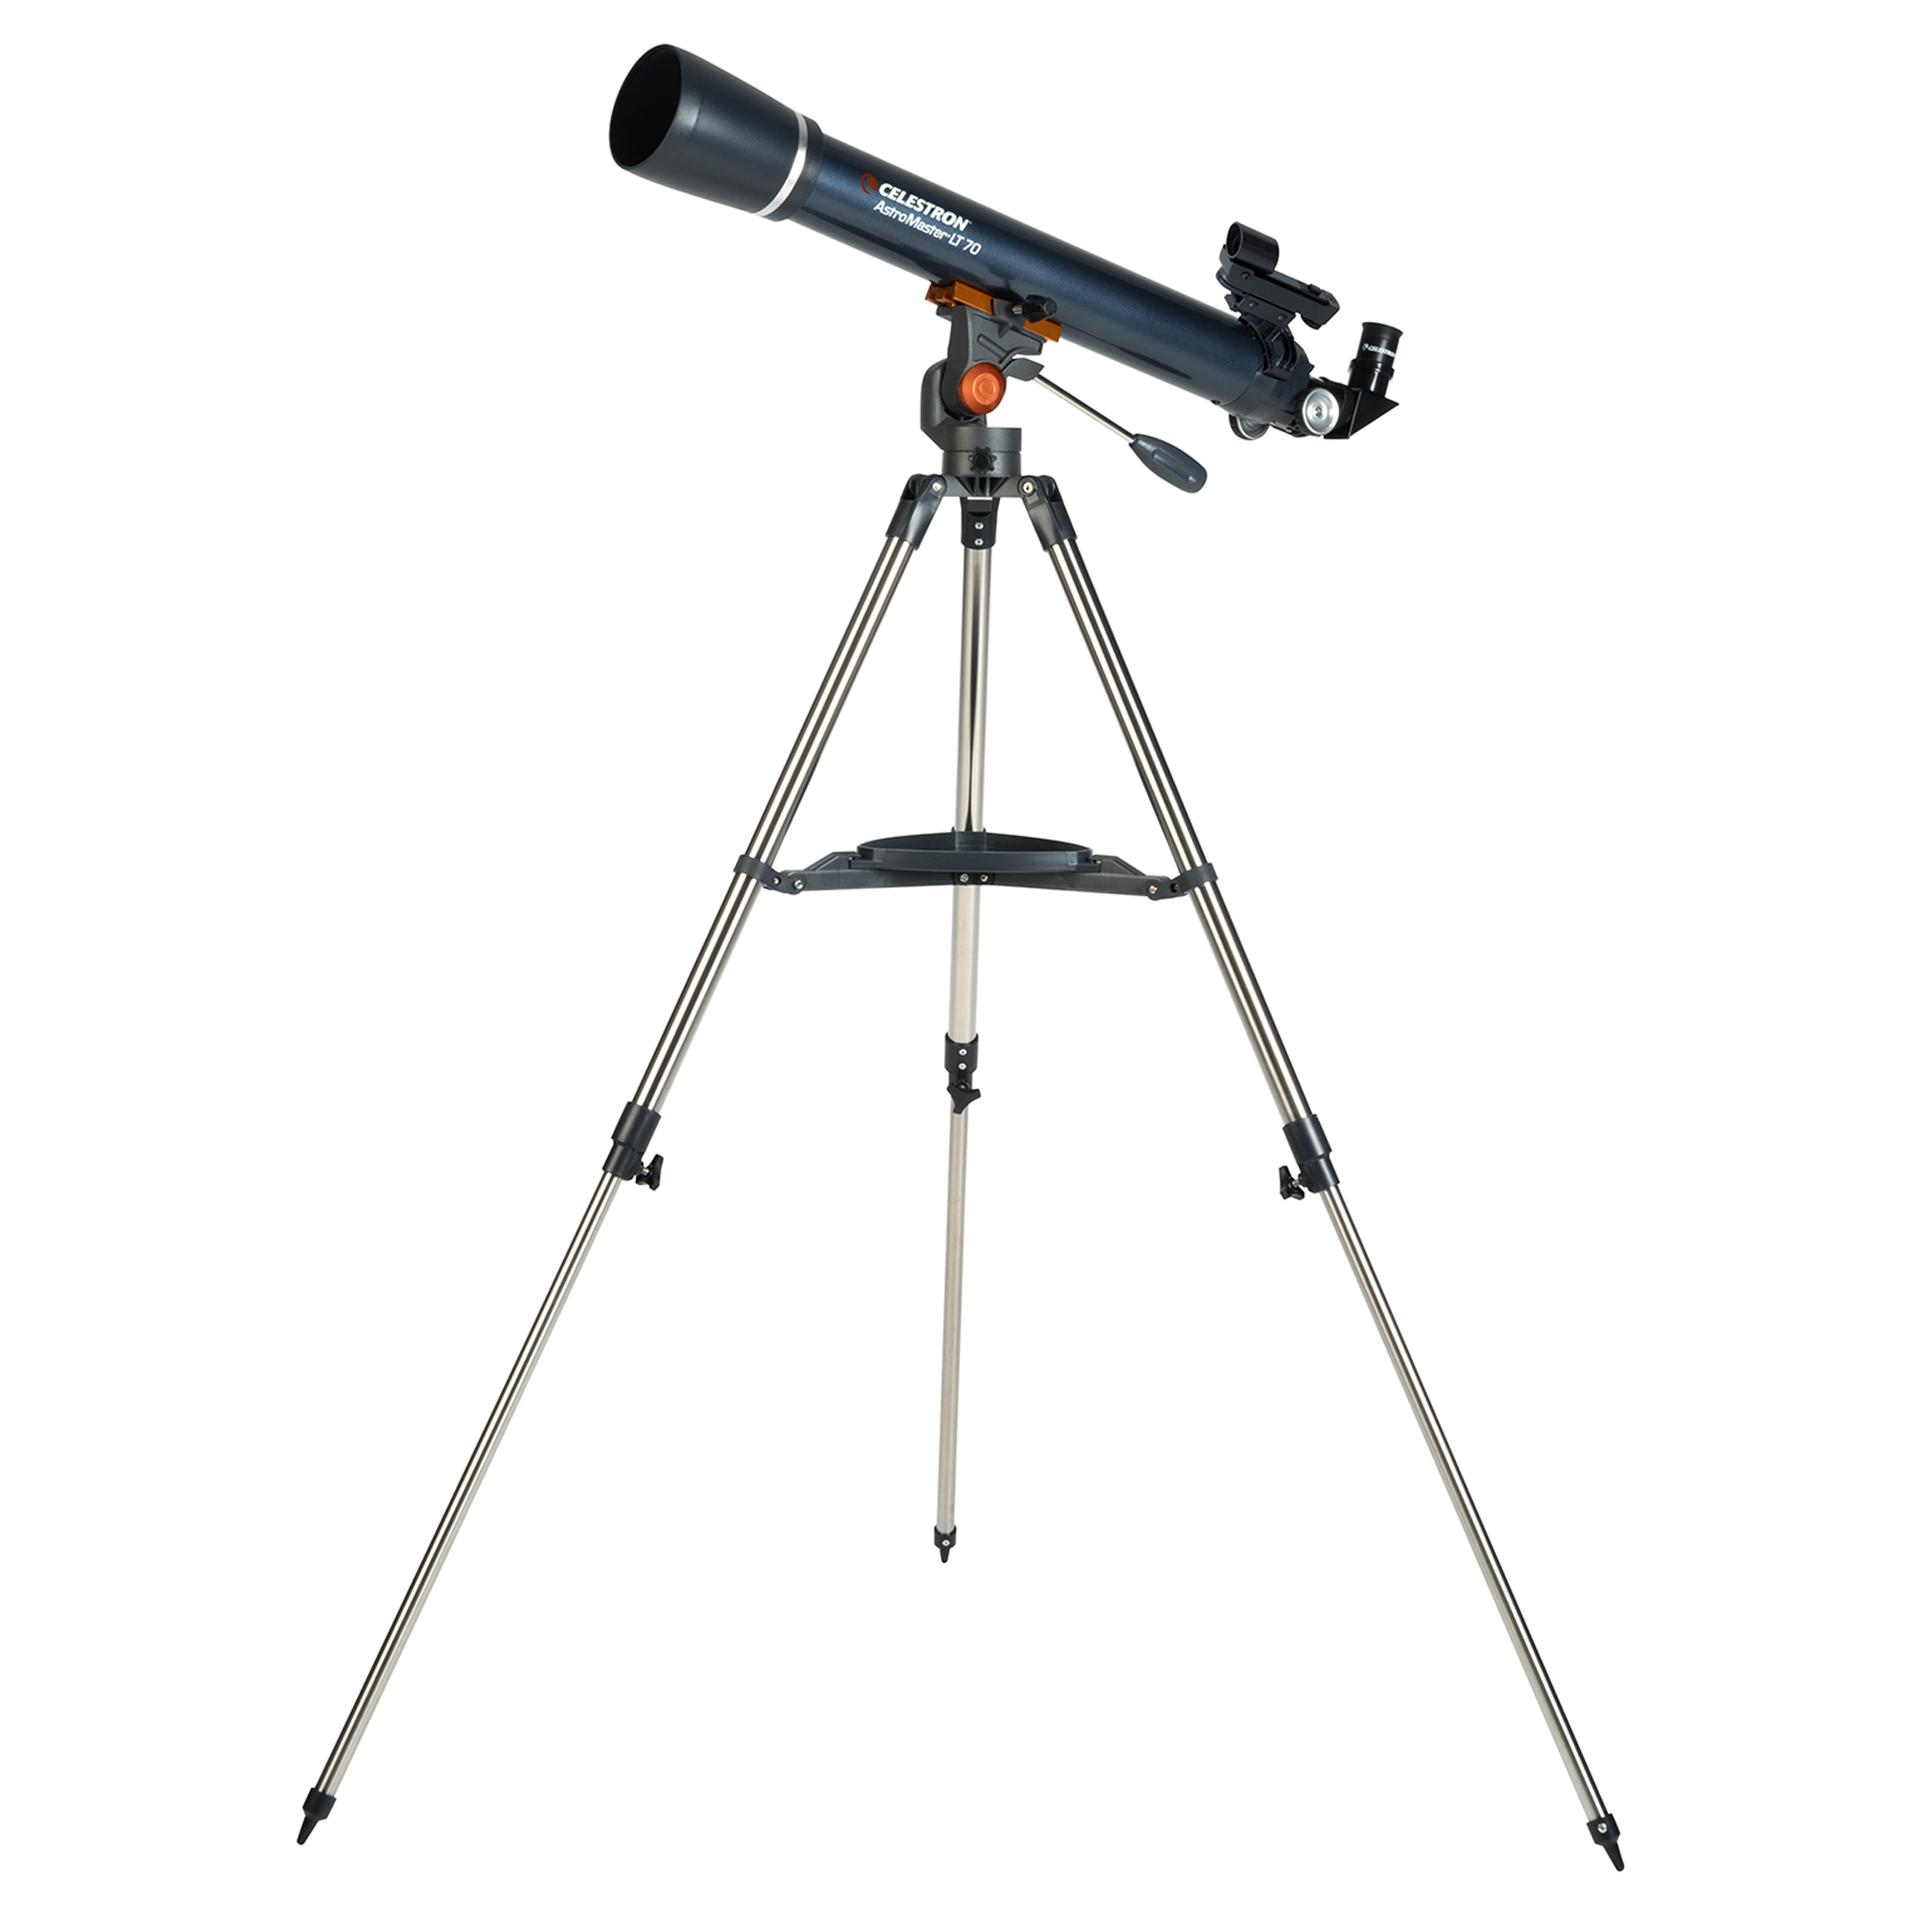 Celestron AstroMaster 70AZ LT Refractor Telescope Kit with Smartphone Adapter and Bluetooth Remote, Ideal Telescope for Beginners, Capture Your Own Images, Tripod plus Bonus Accessories Included - image 3 of 8